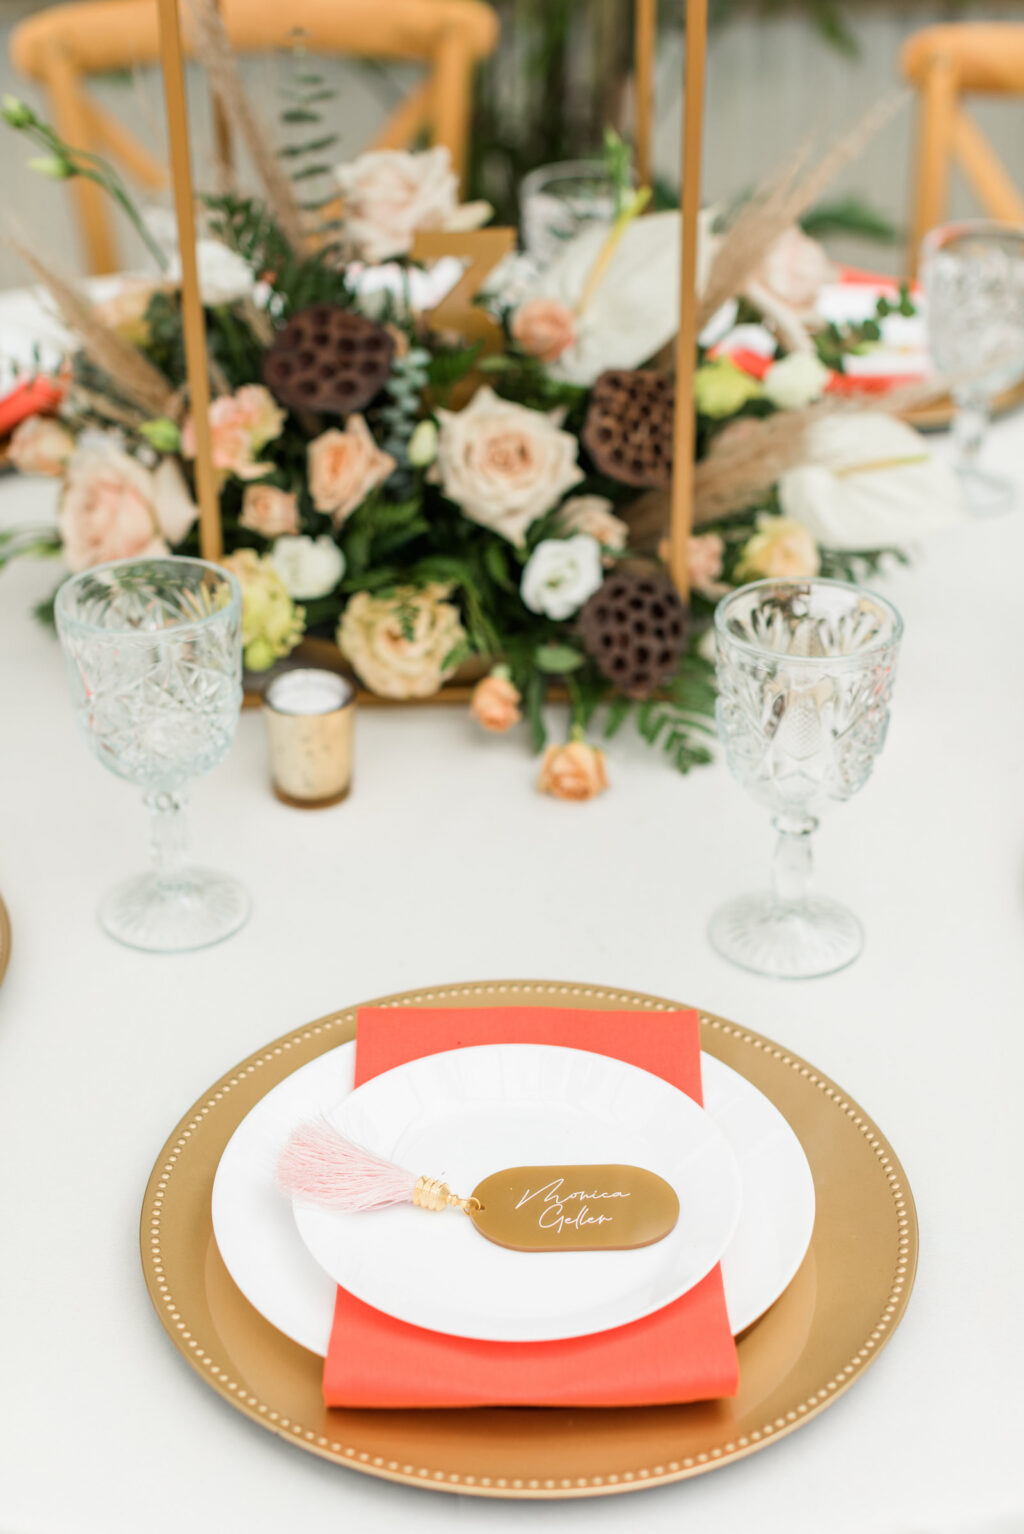 Boho Mid-Century Modern Wedding Decor, Gold Charger, Orange Linen Napkin, Gold Acrylic Place Card with Pink Tassle Ivory Roses, Greenery, Lotus Flower Seed Pod | Table Design Becca's Bloomin' Buds | Big Fake Wedding Tampa